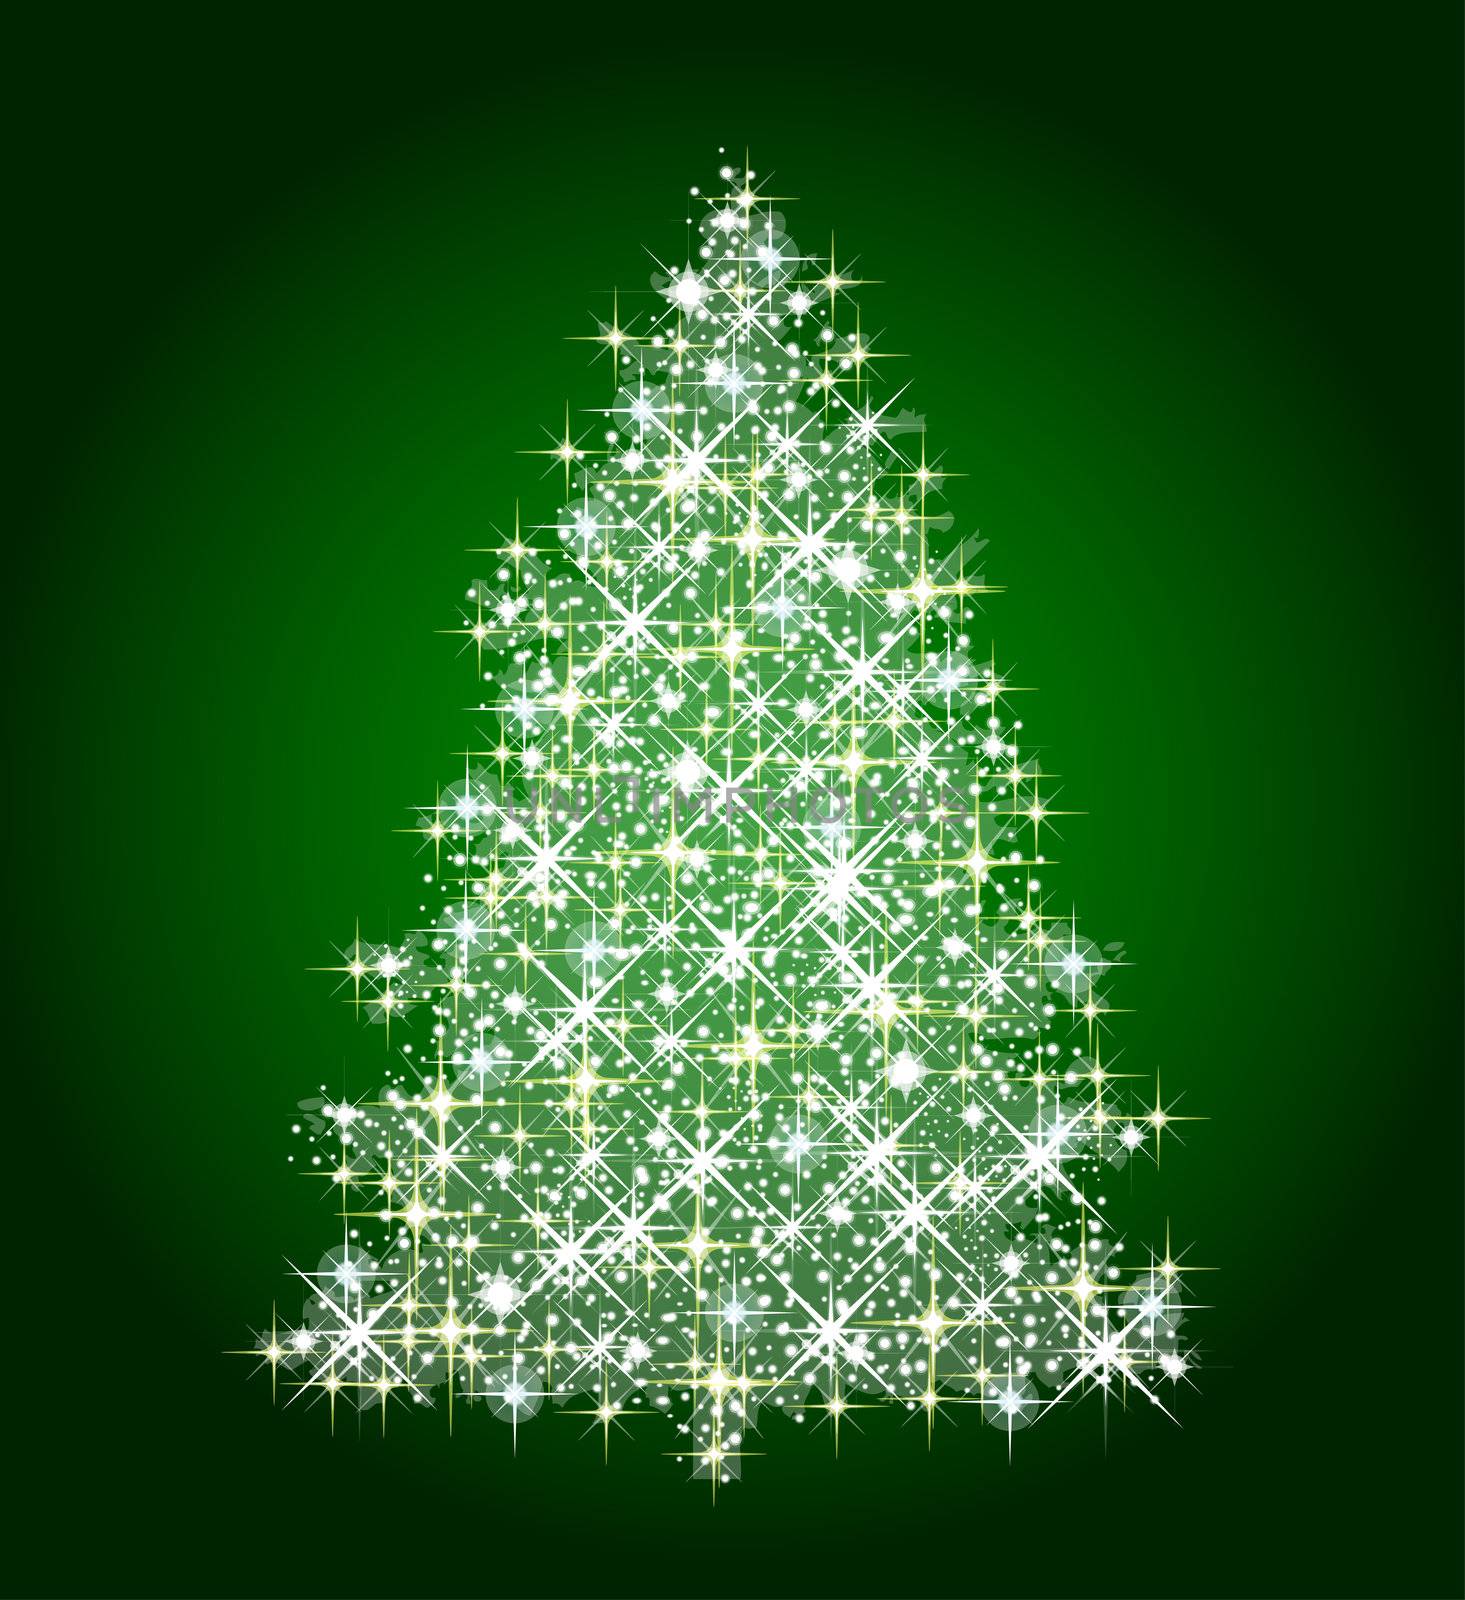 illustration of a christmas tree on green background